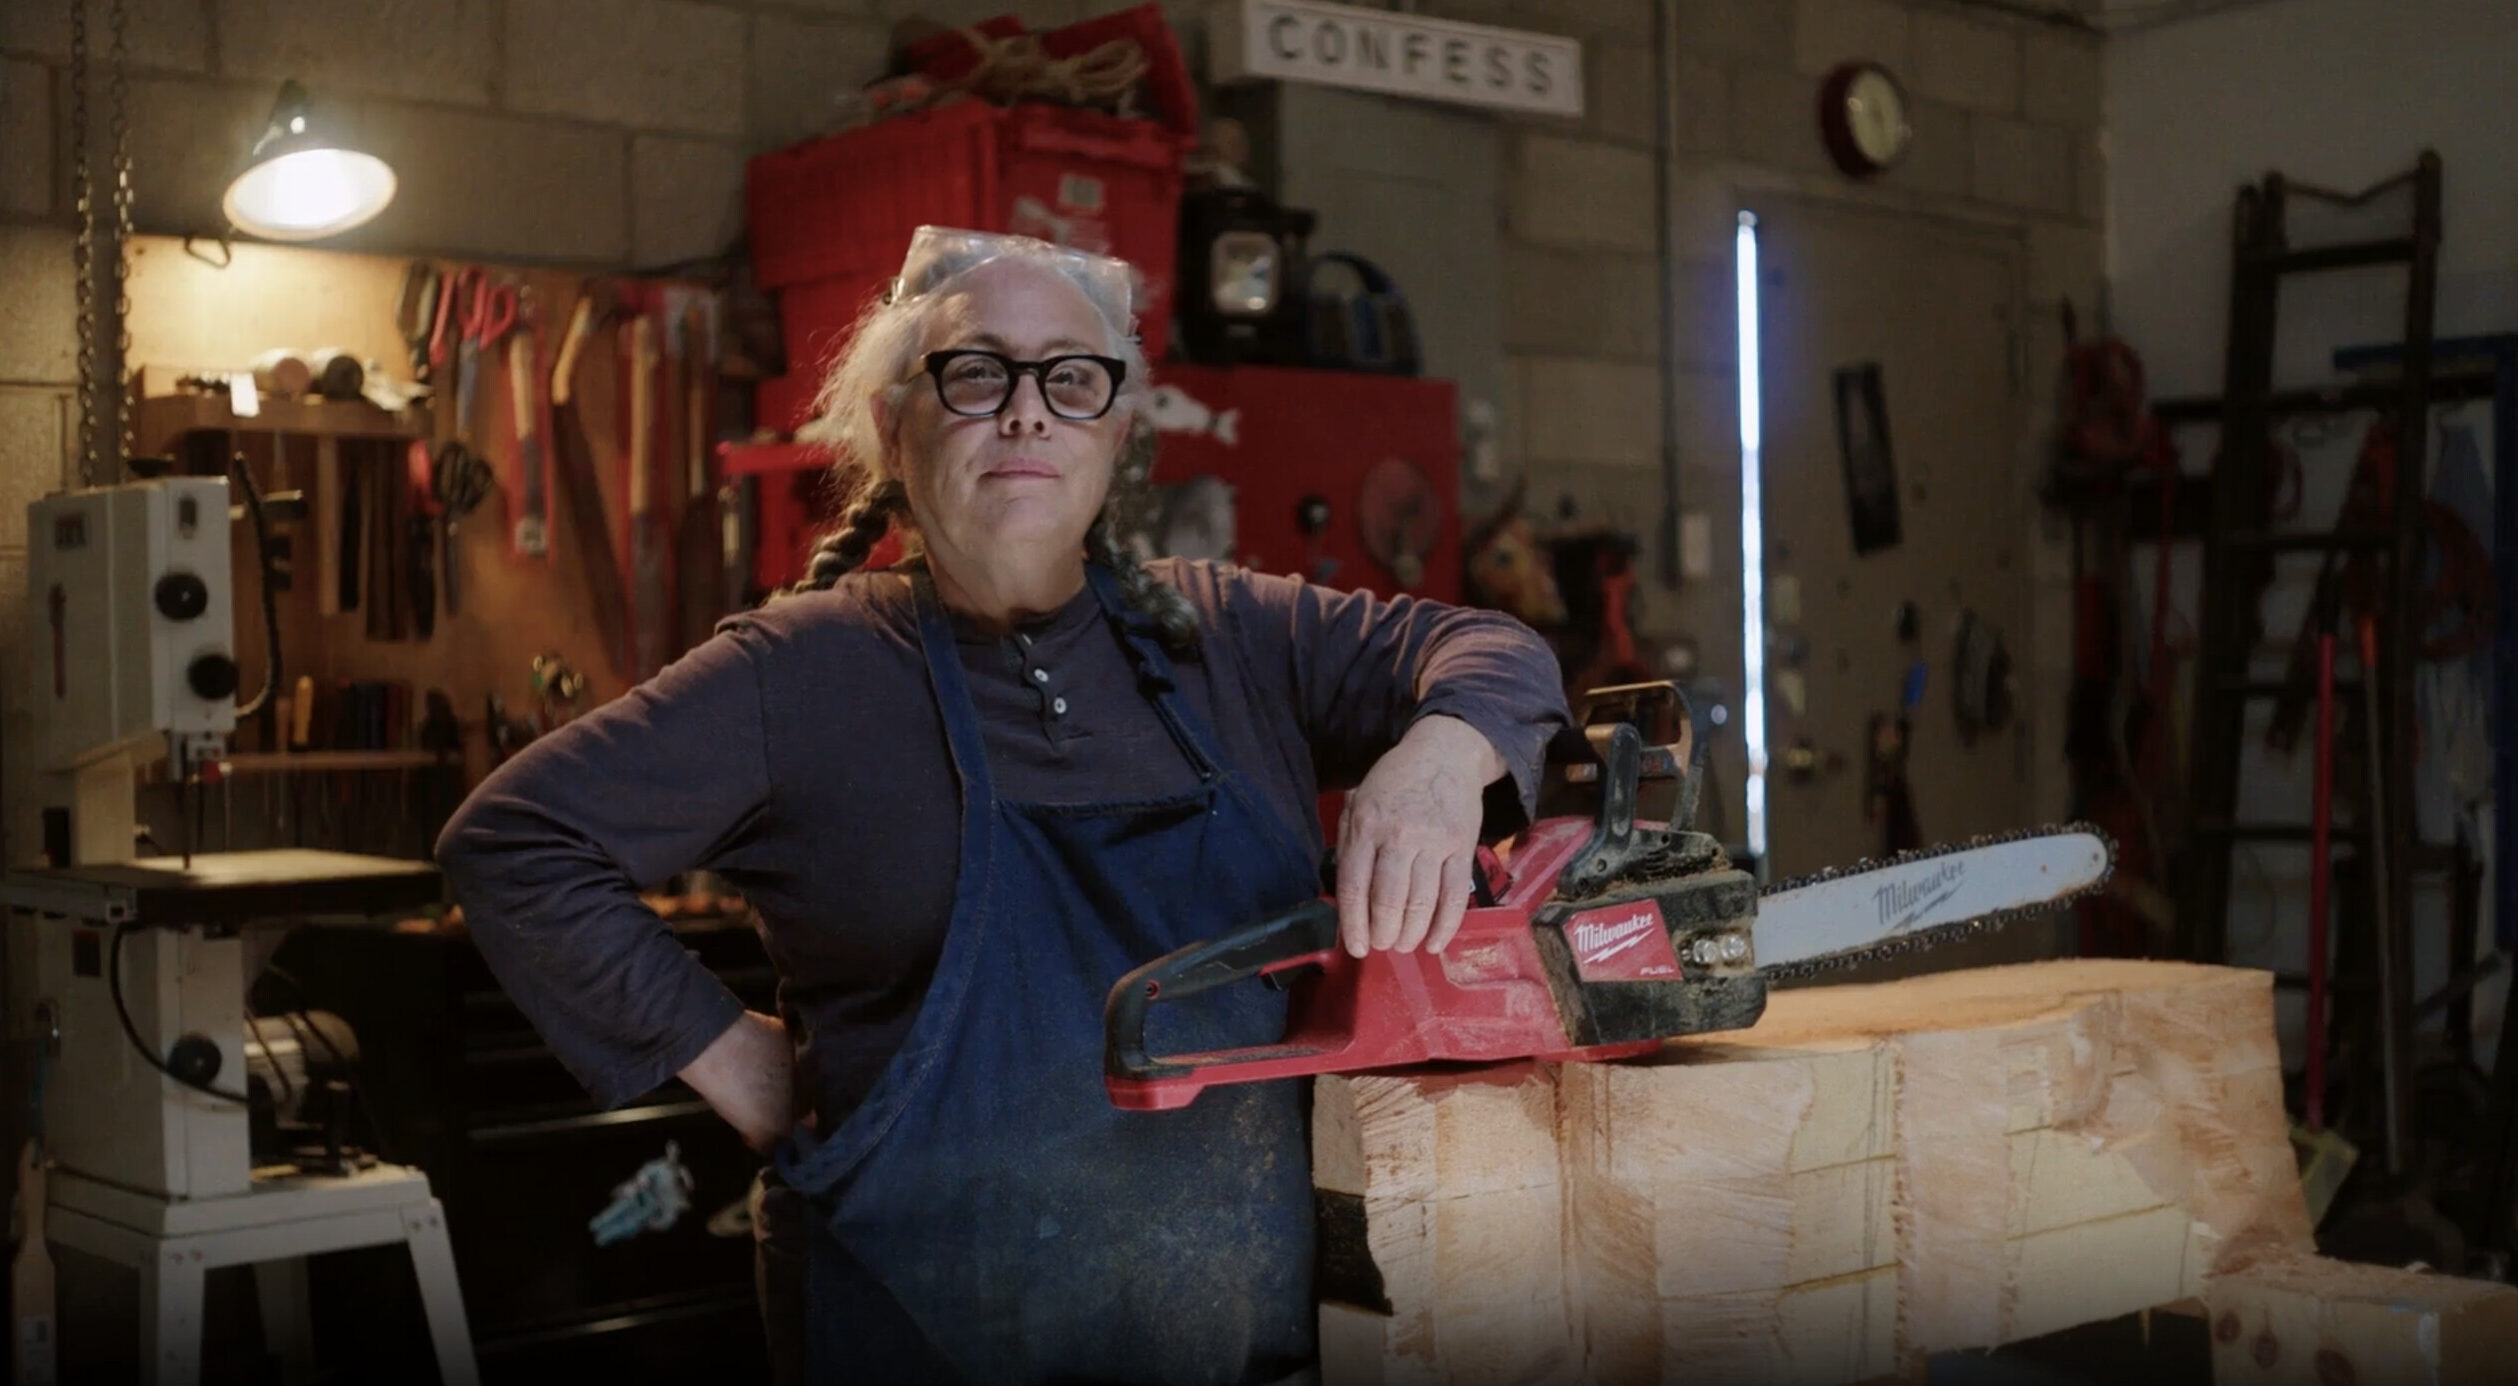 A woman with medium-light skin tone, gray pigtails, large black glasses, a dark long-sleeve shirt and a navy apron stands proudly looking at the camera in a wood shop artist studio. Both her arms are bent, one at her waist and the other leaning on a chainsaw that rests on a large piece of wood on a table.